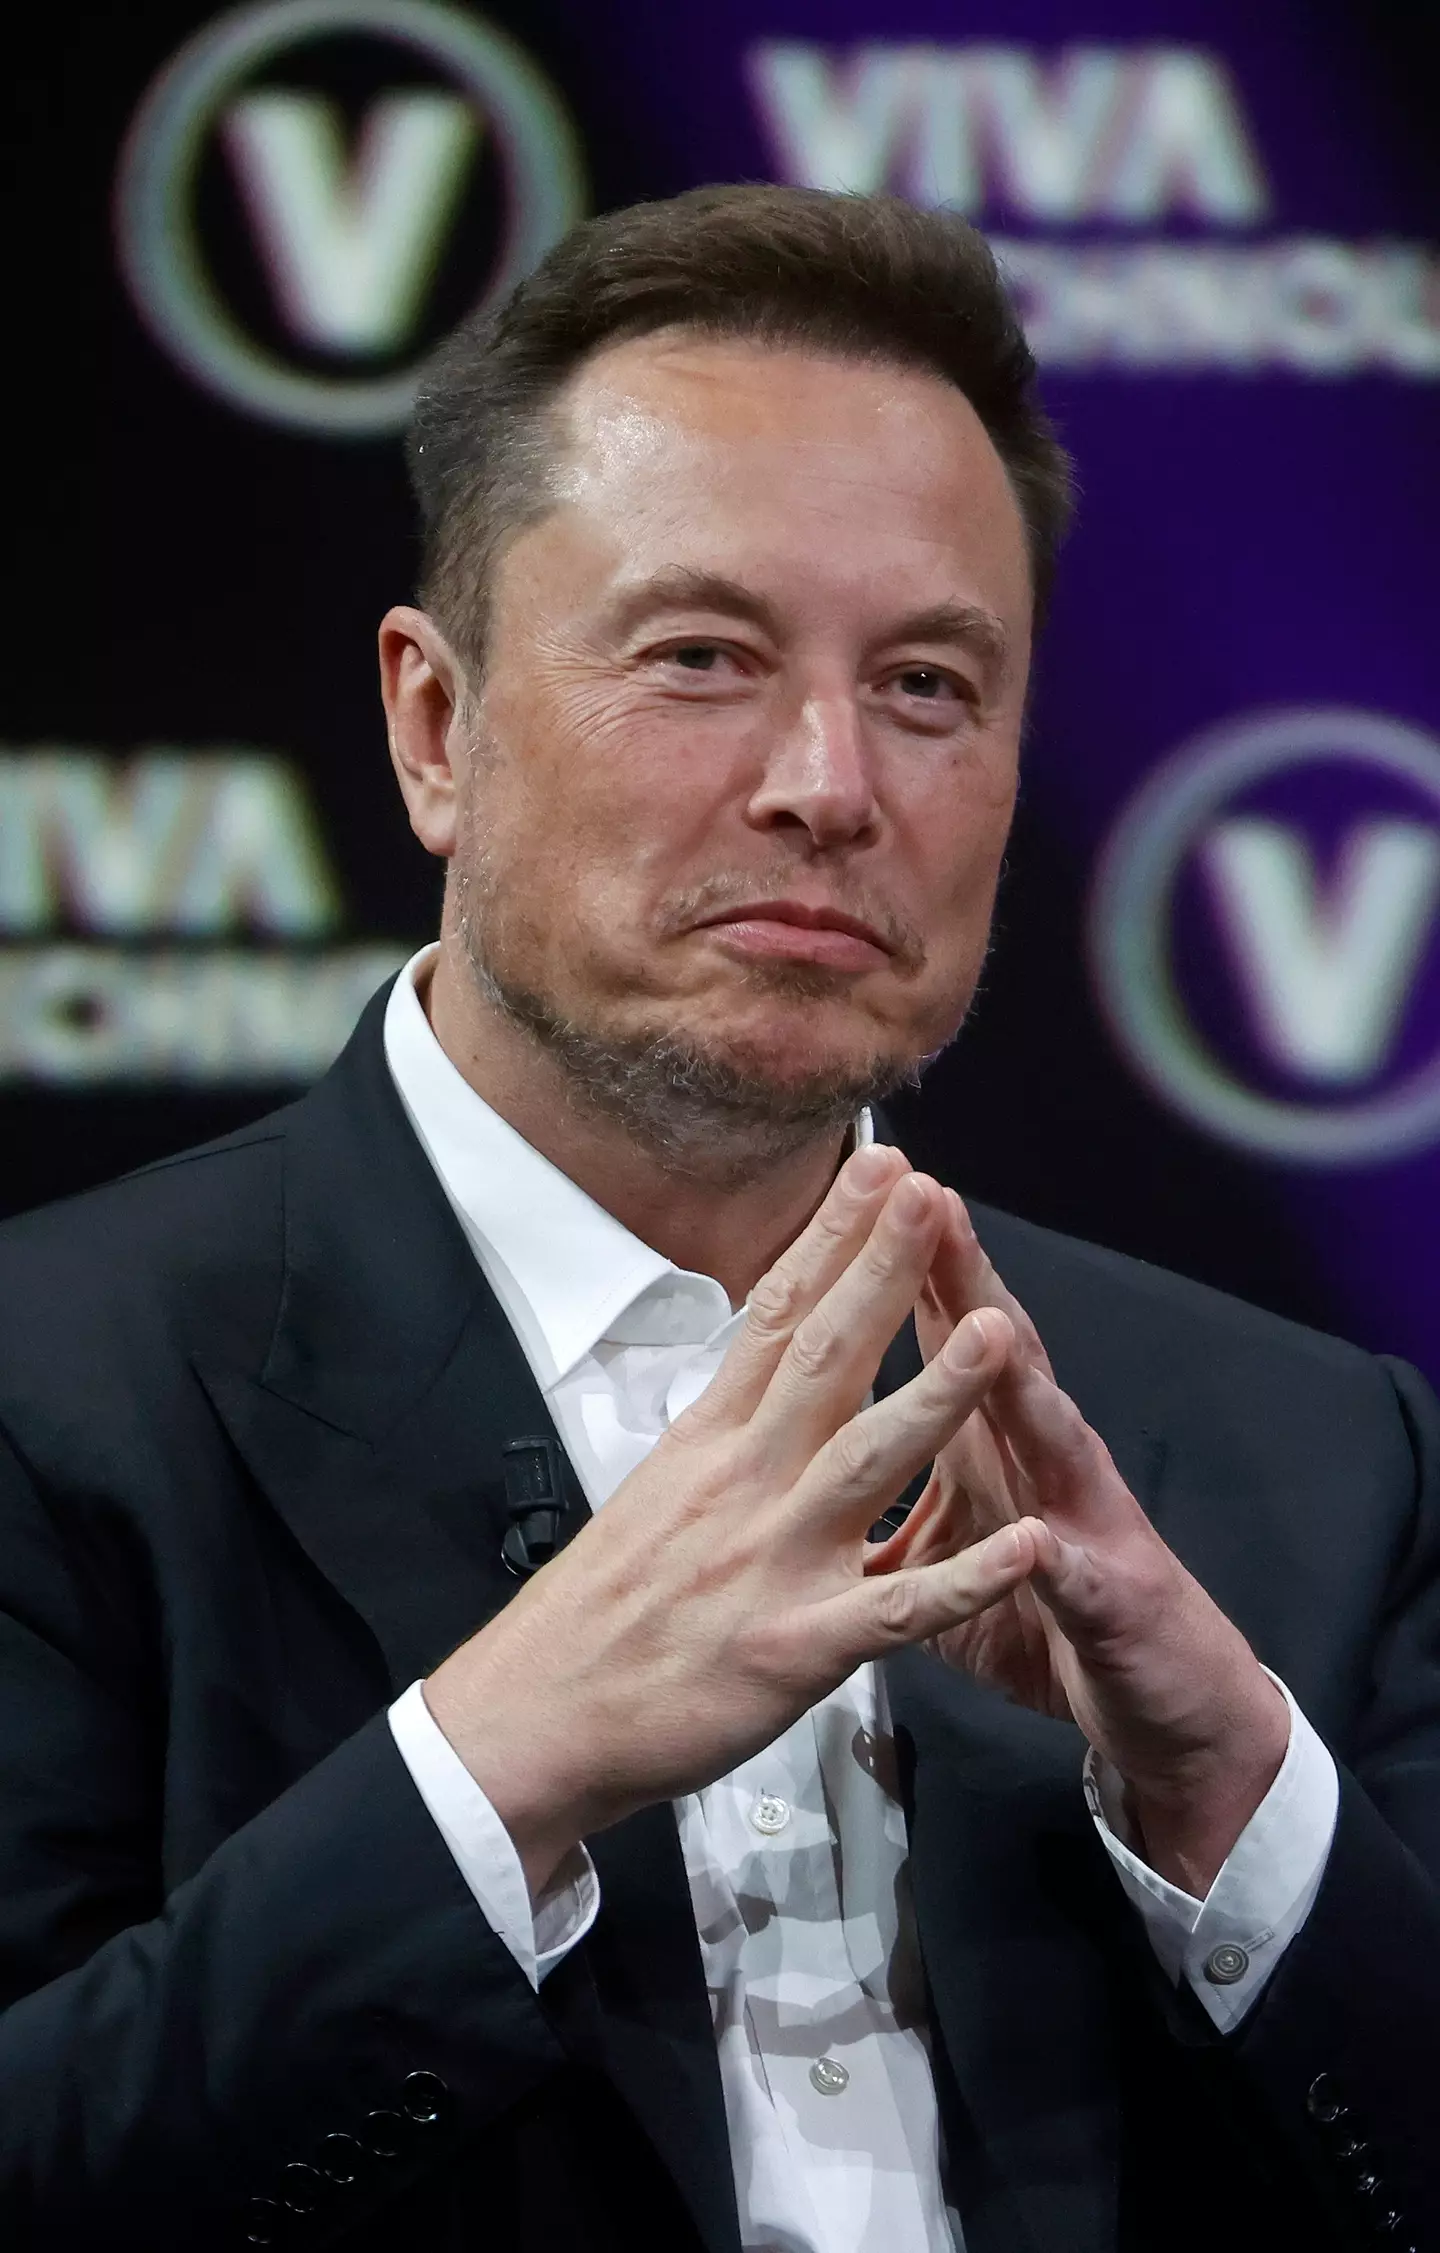 Elon Musk is planning to make a massive change to Twitter.